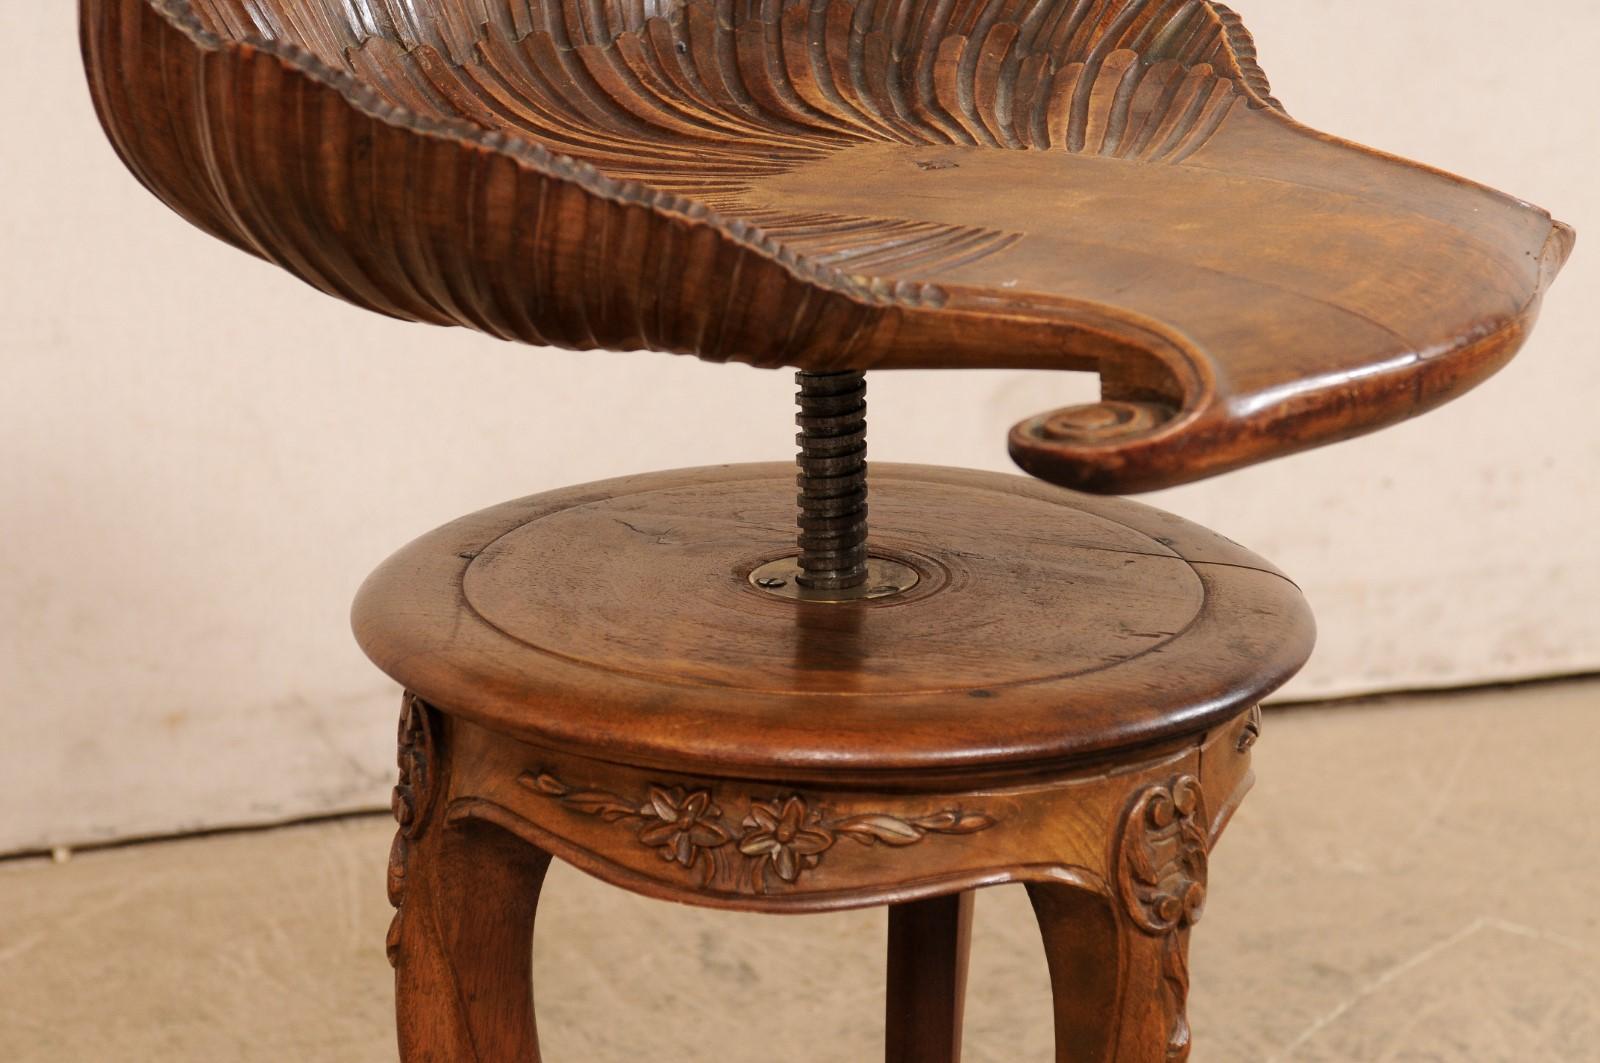 Italian Antique Wooden Grotto Stool w/Carved-Shell Seat In Good Condition For Sale In Atlanta, GA